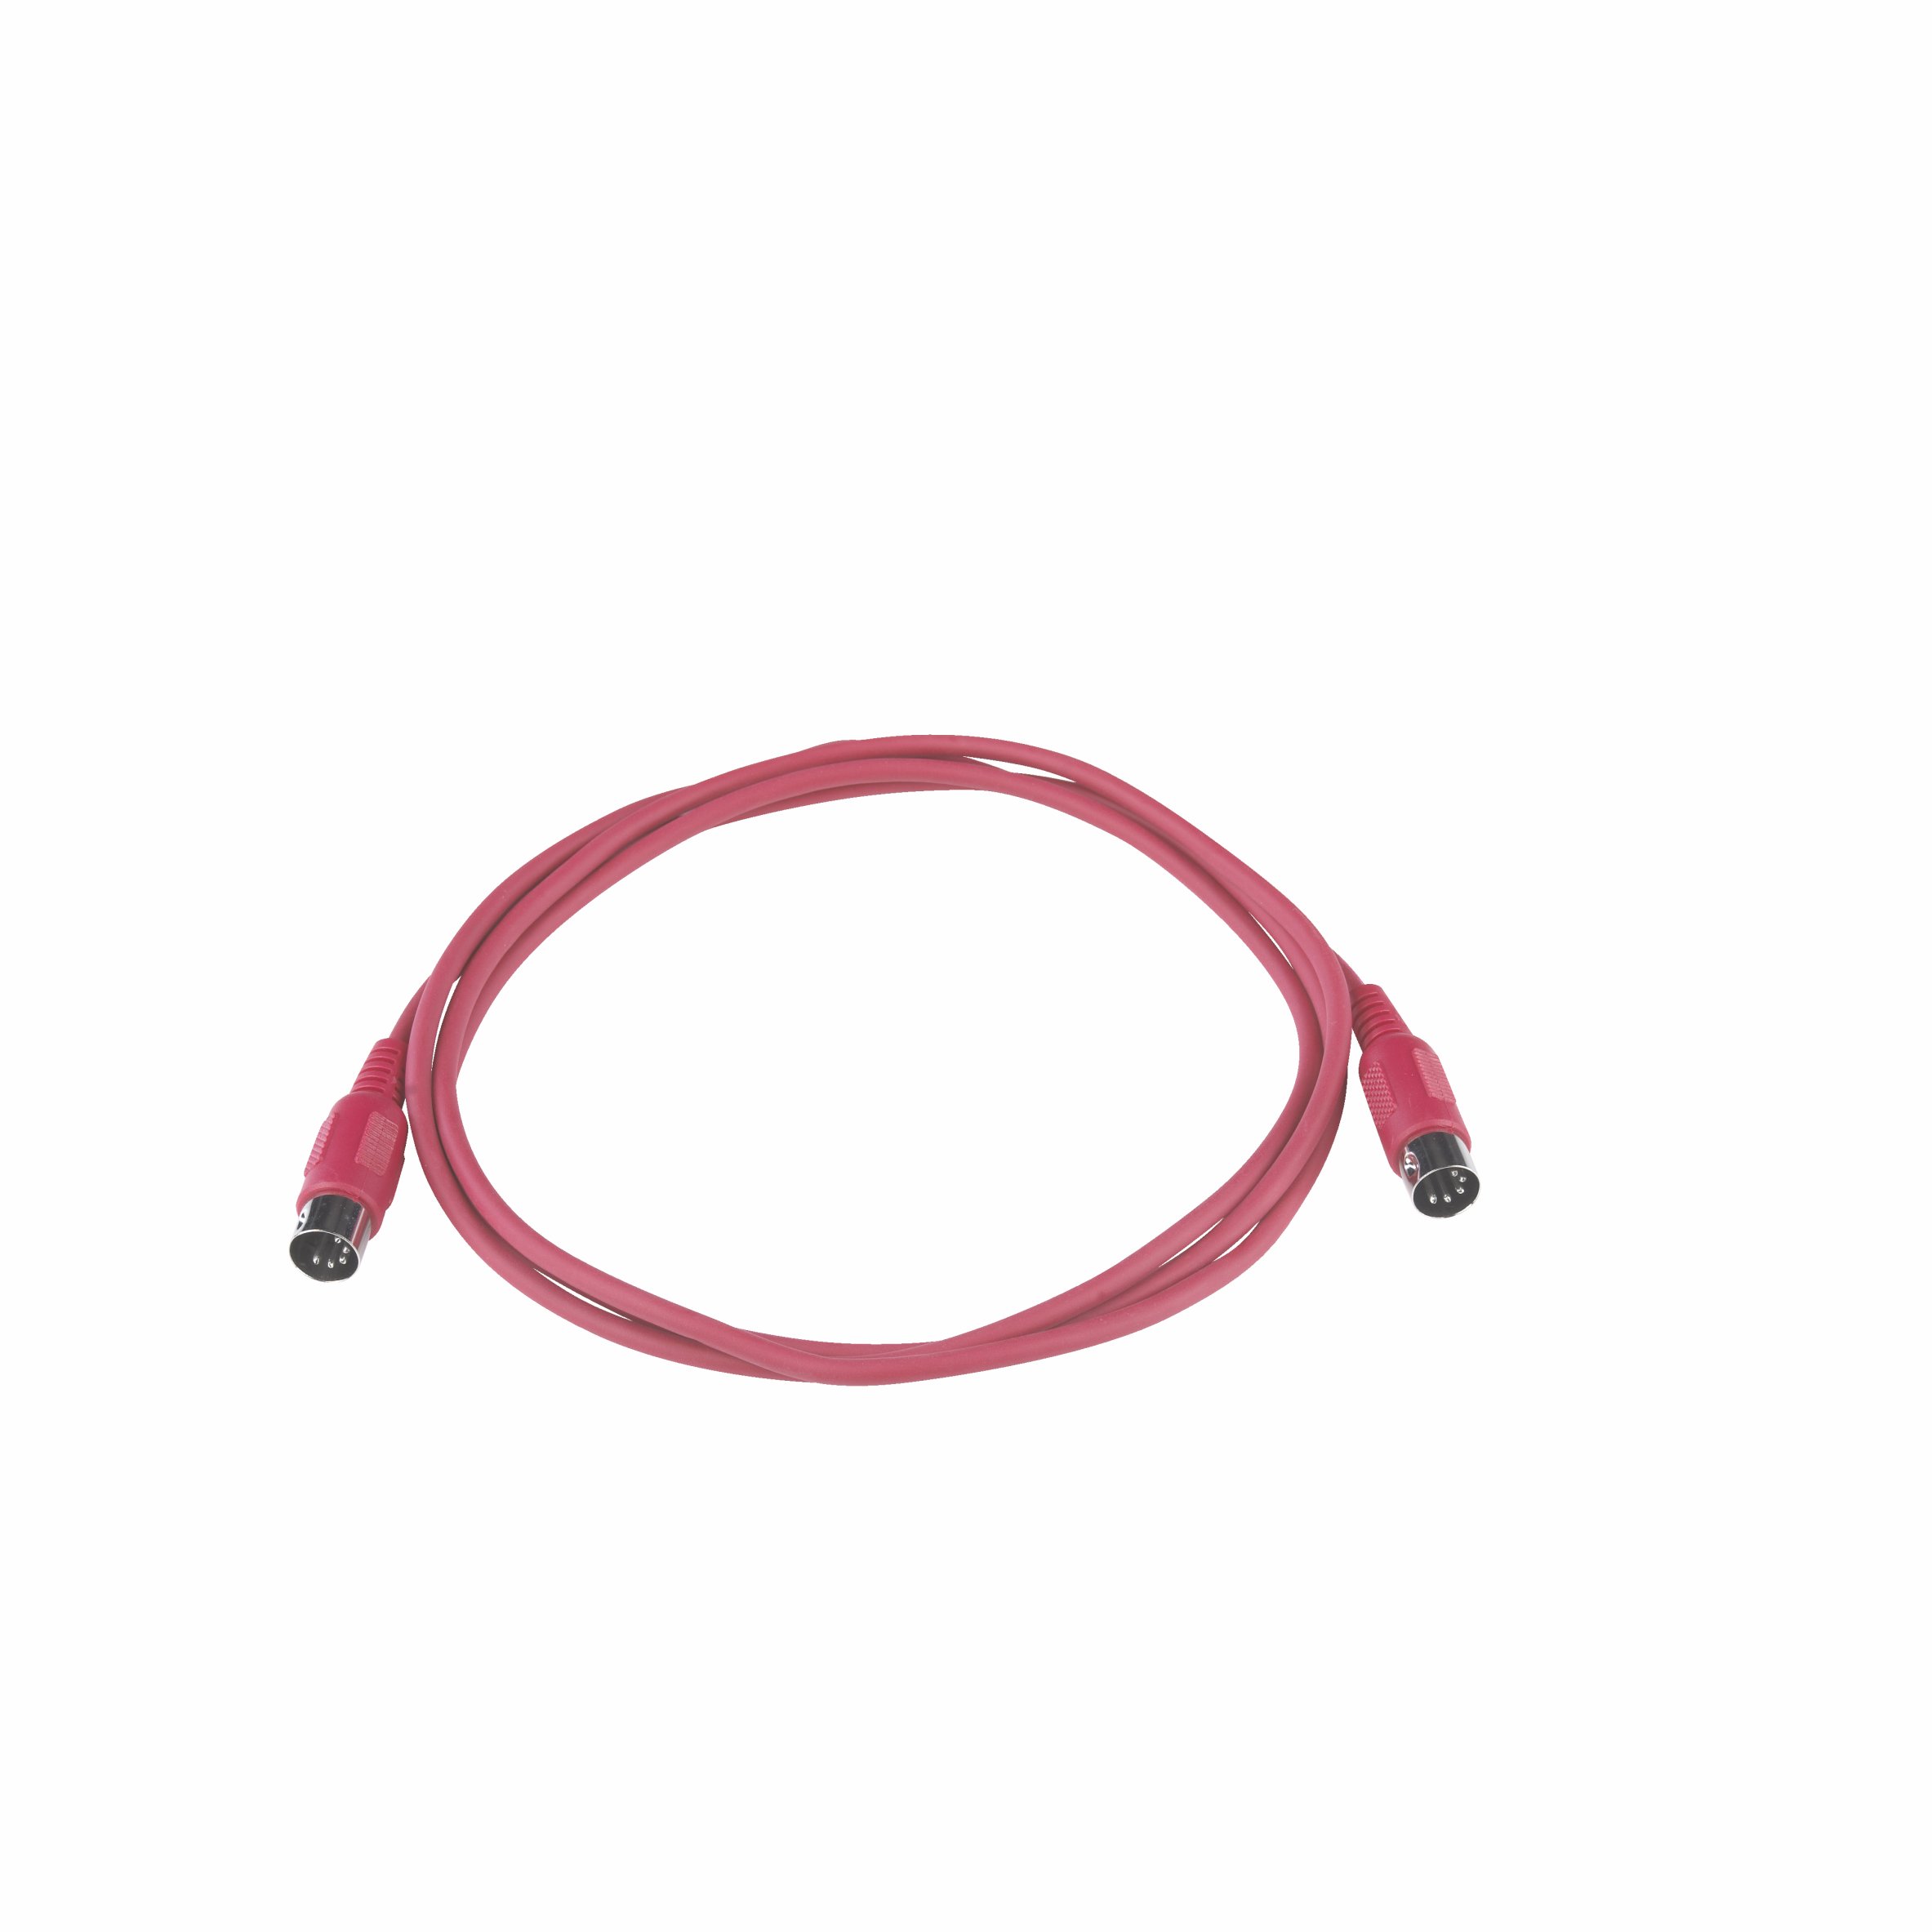 RockCable Midi Cable (Red) - 1 m / 3.3 ft